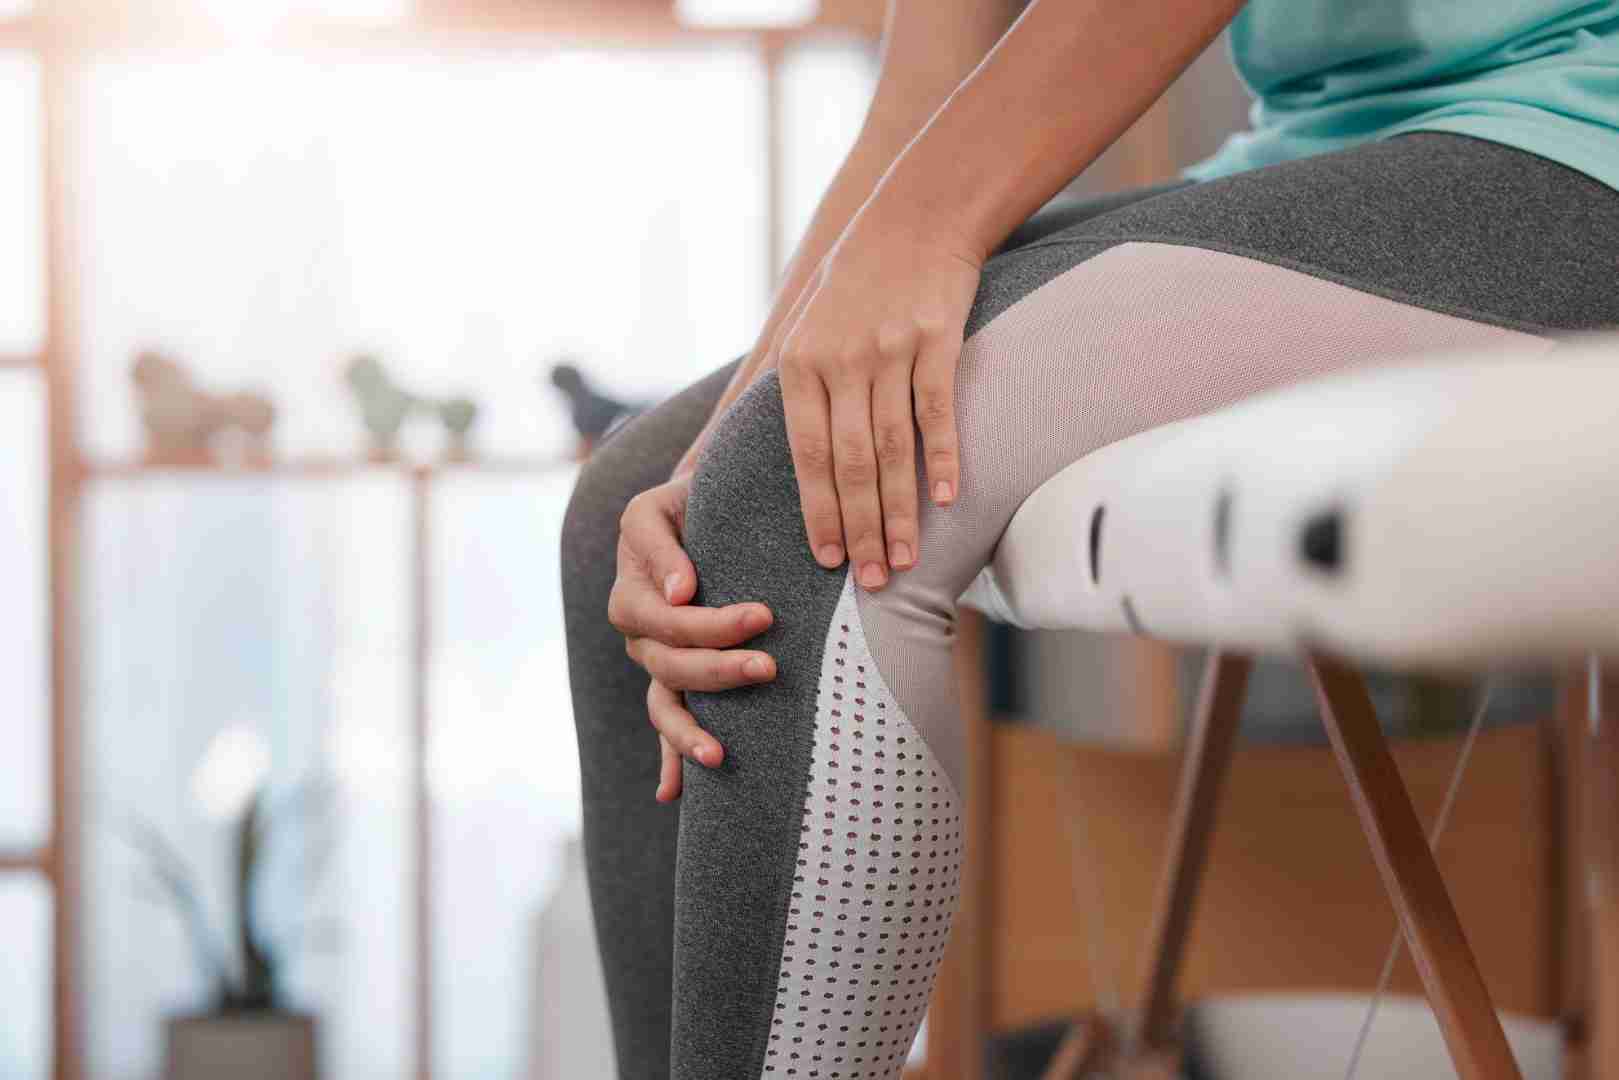 A person wearing grey and white leggings is seated, holding their knee with both hands. The indoor setting is softly lit, with sunlight streaming through a window in the background. The scene suggests a moment of rest or addressing knee discomfort, much like a session at Austin Manual Therapy Associates.